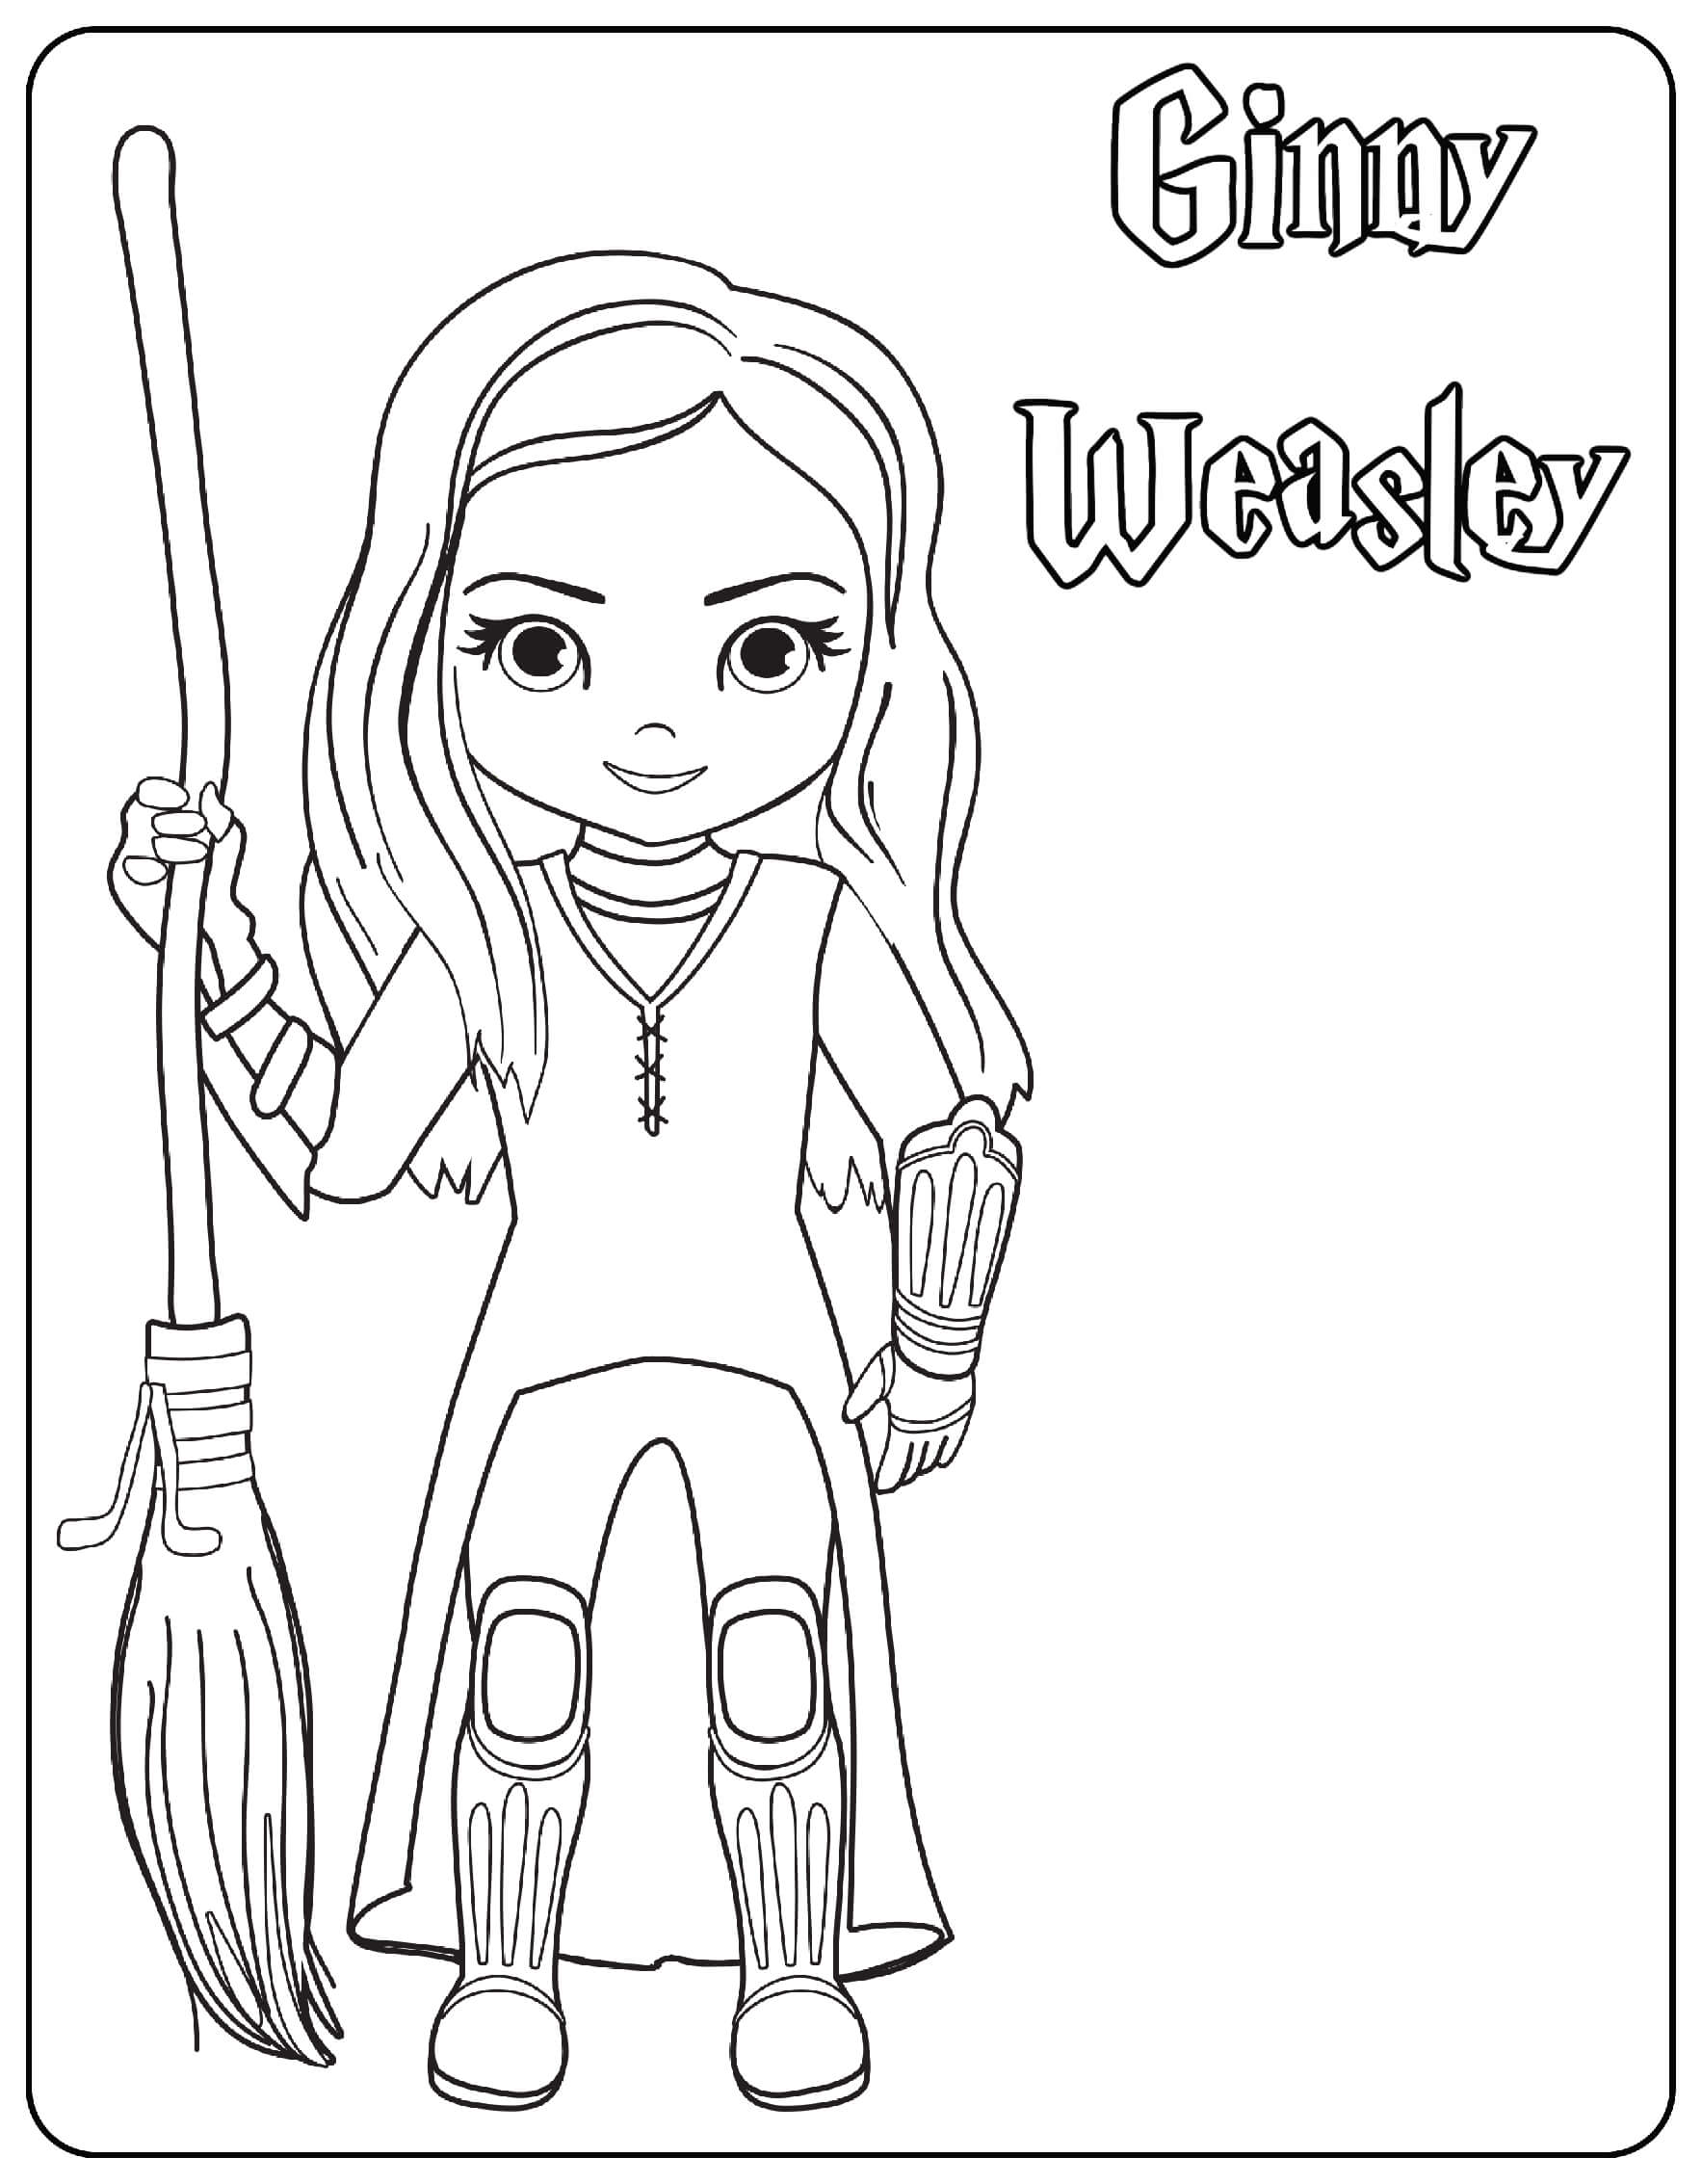 Ginny Weasley Coloring Page